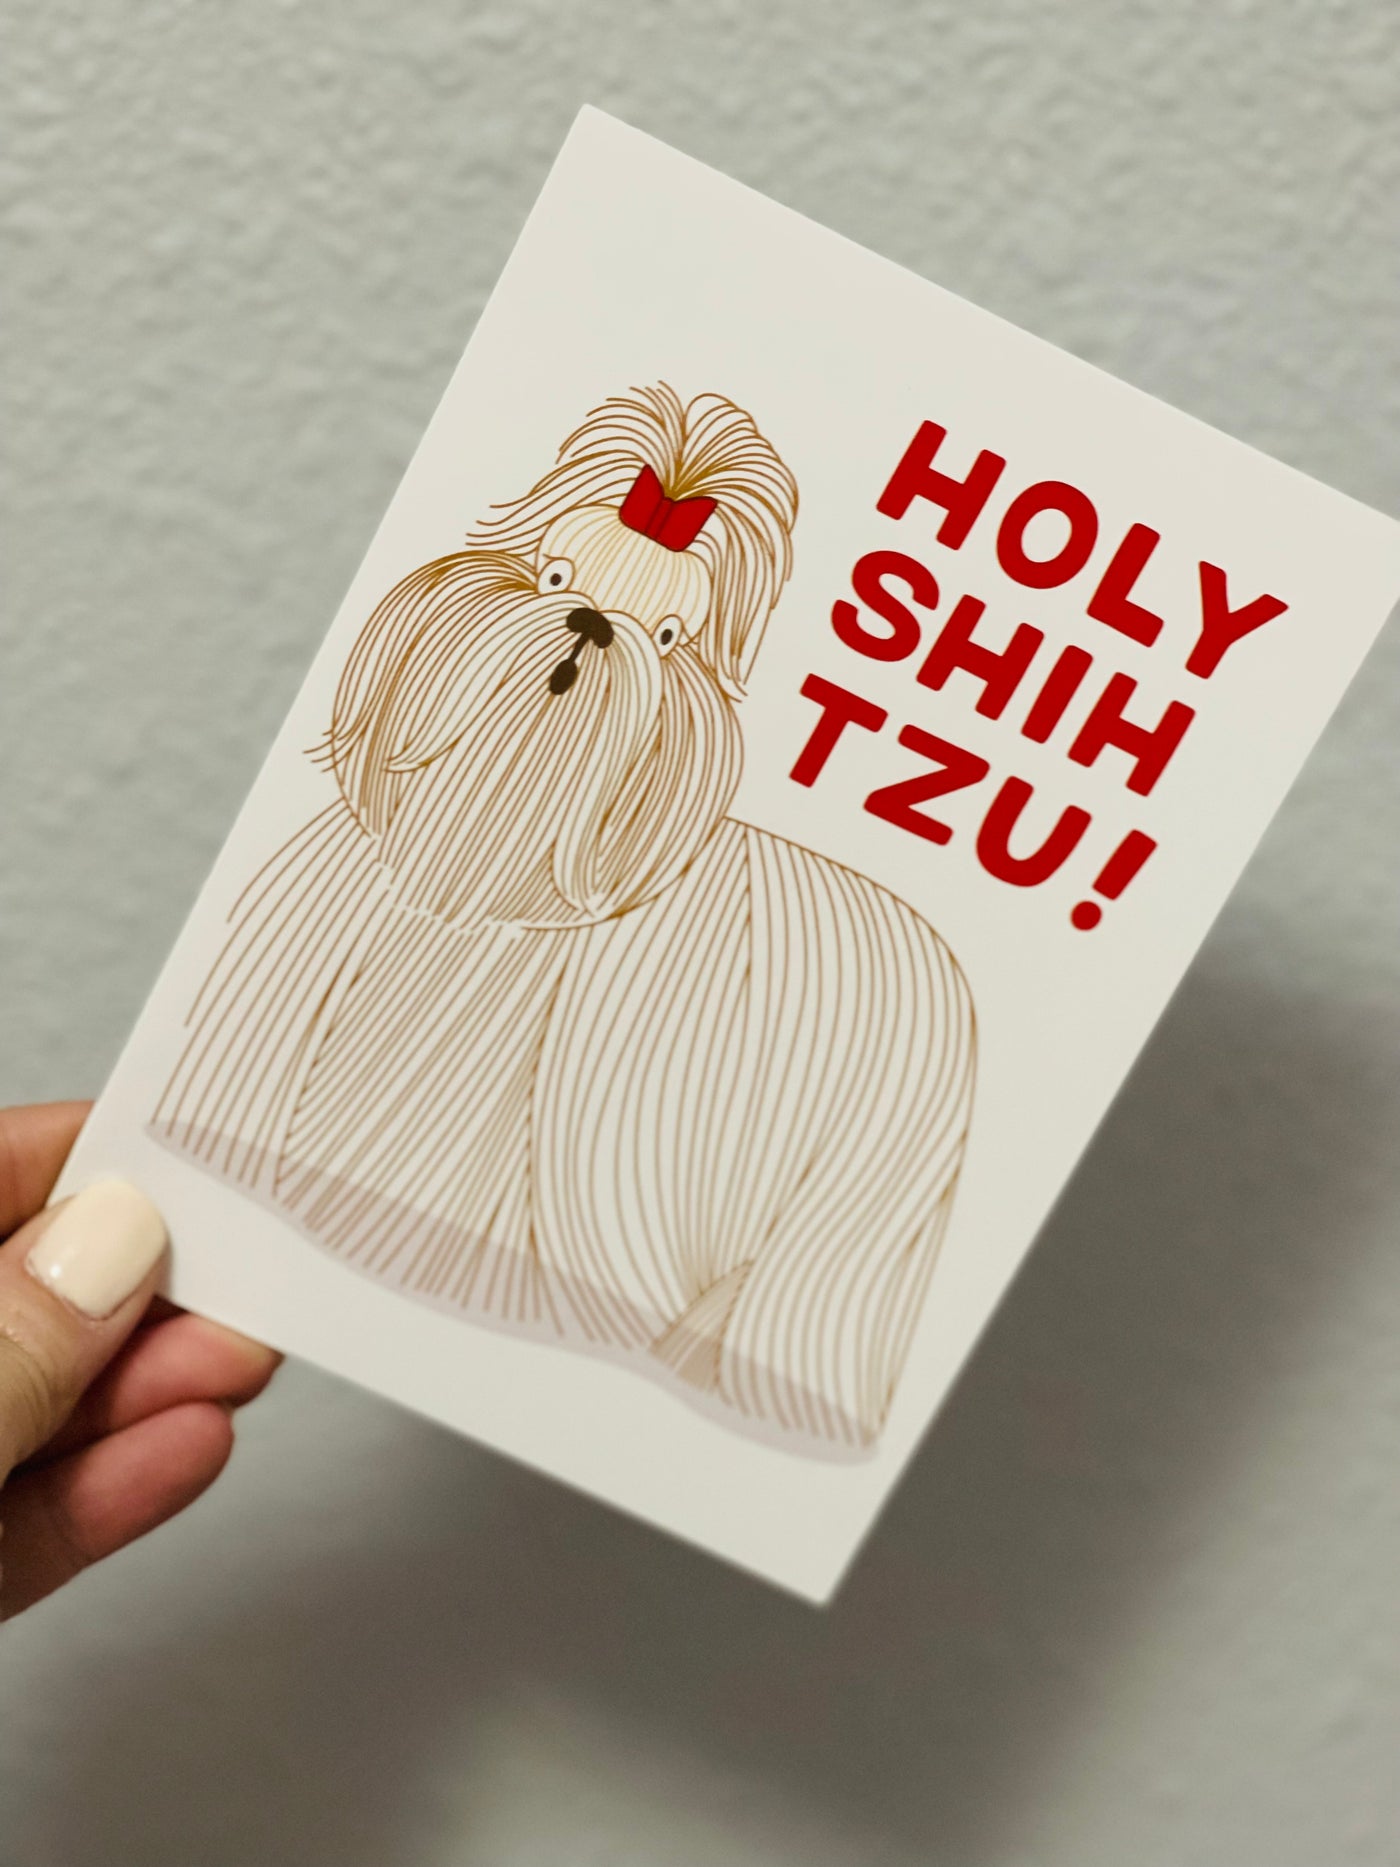 Biely & Shoaf Greeting Cards